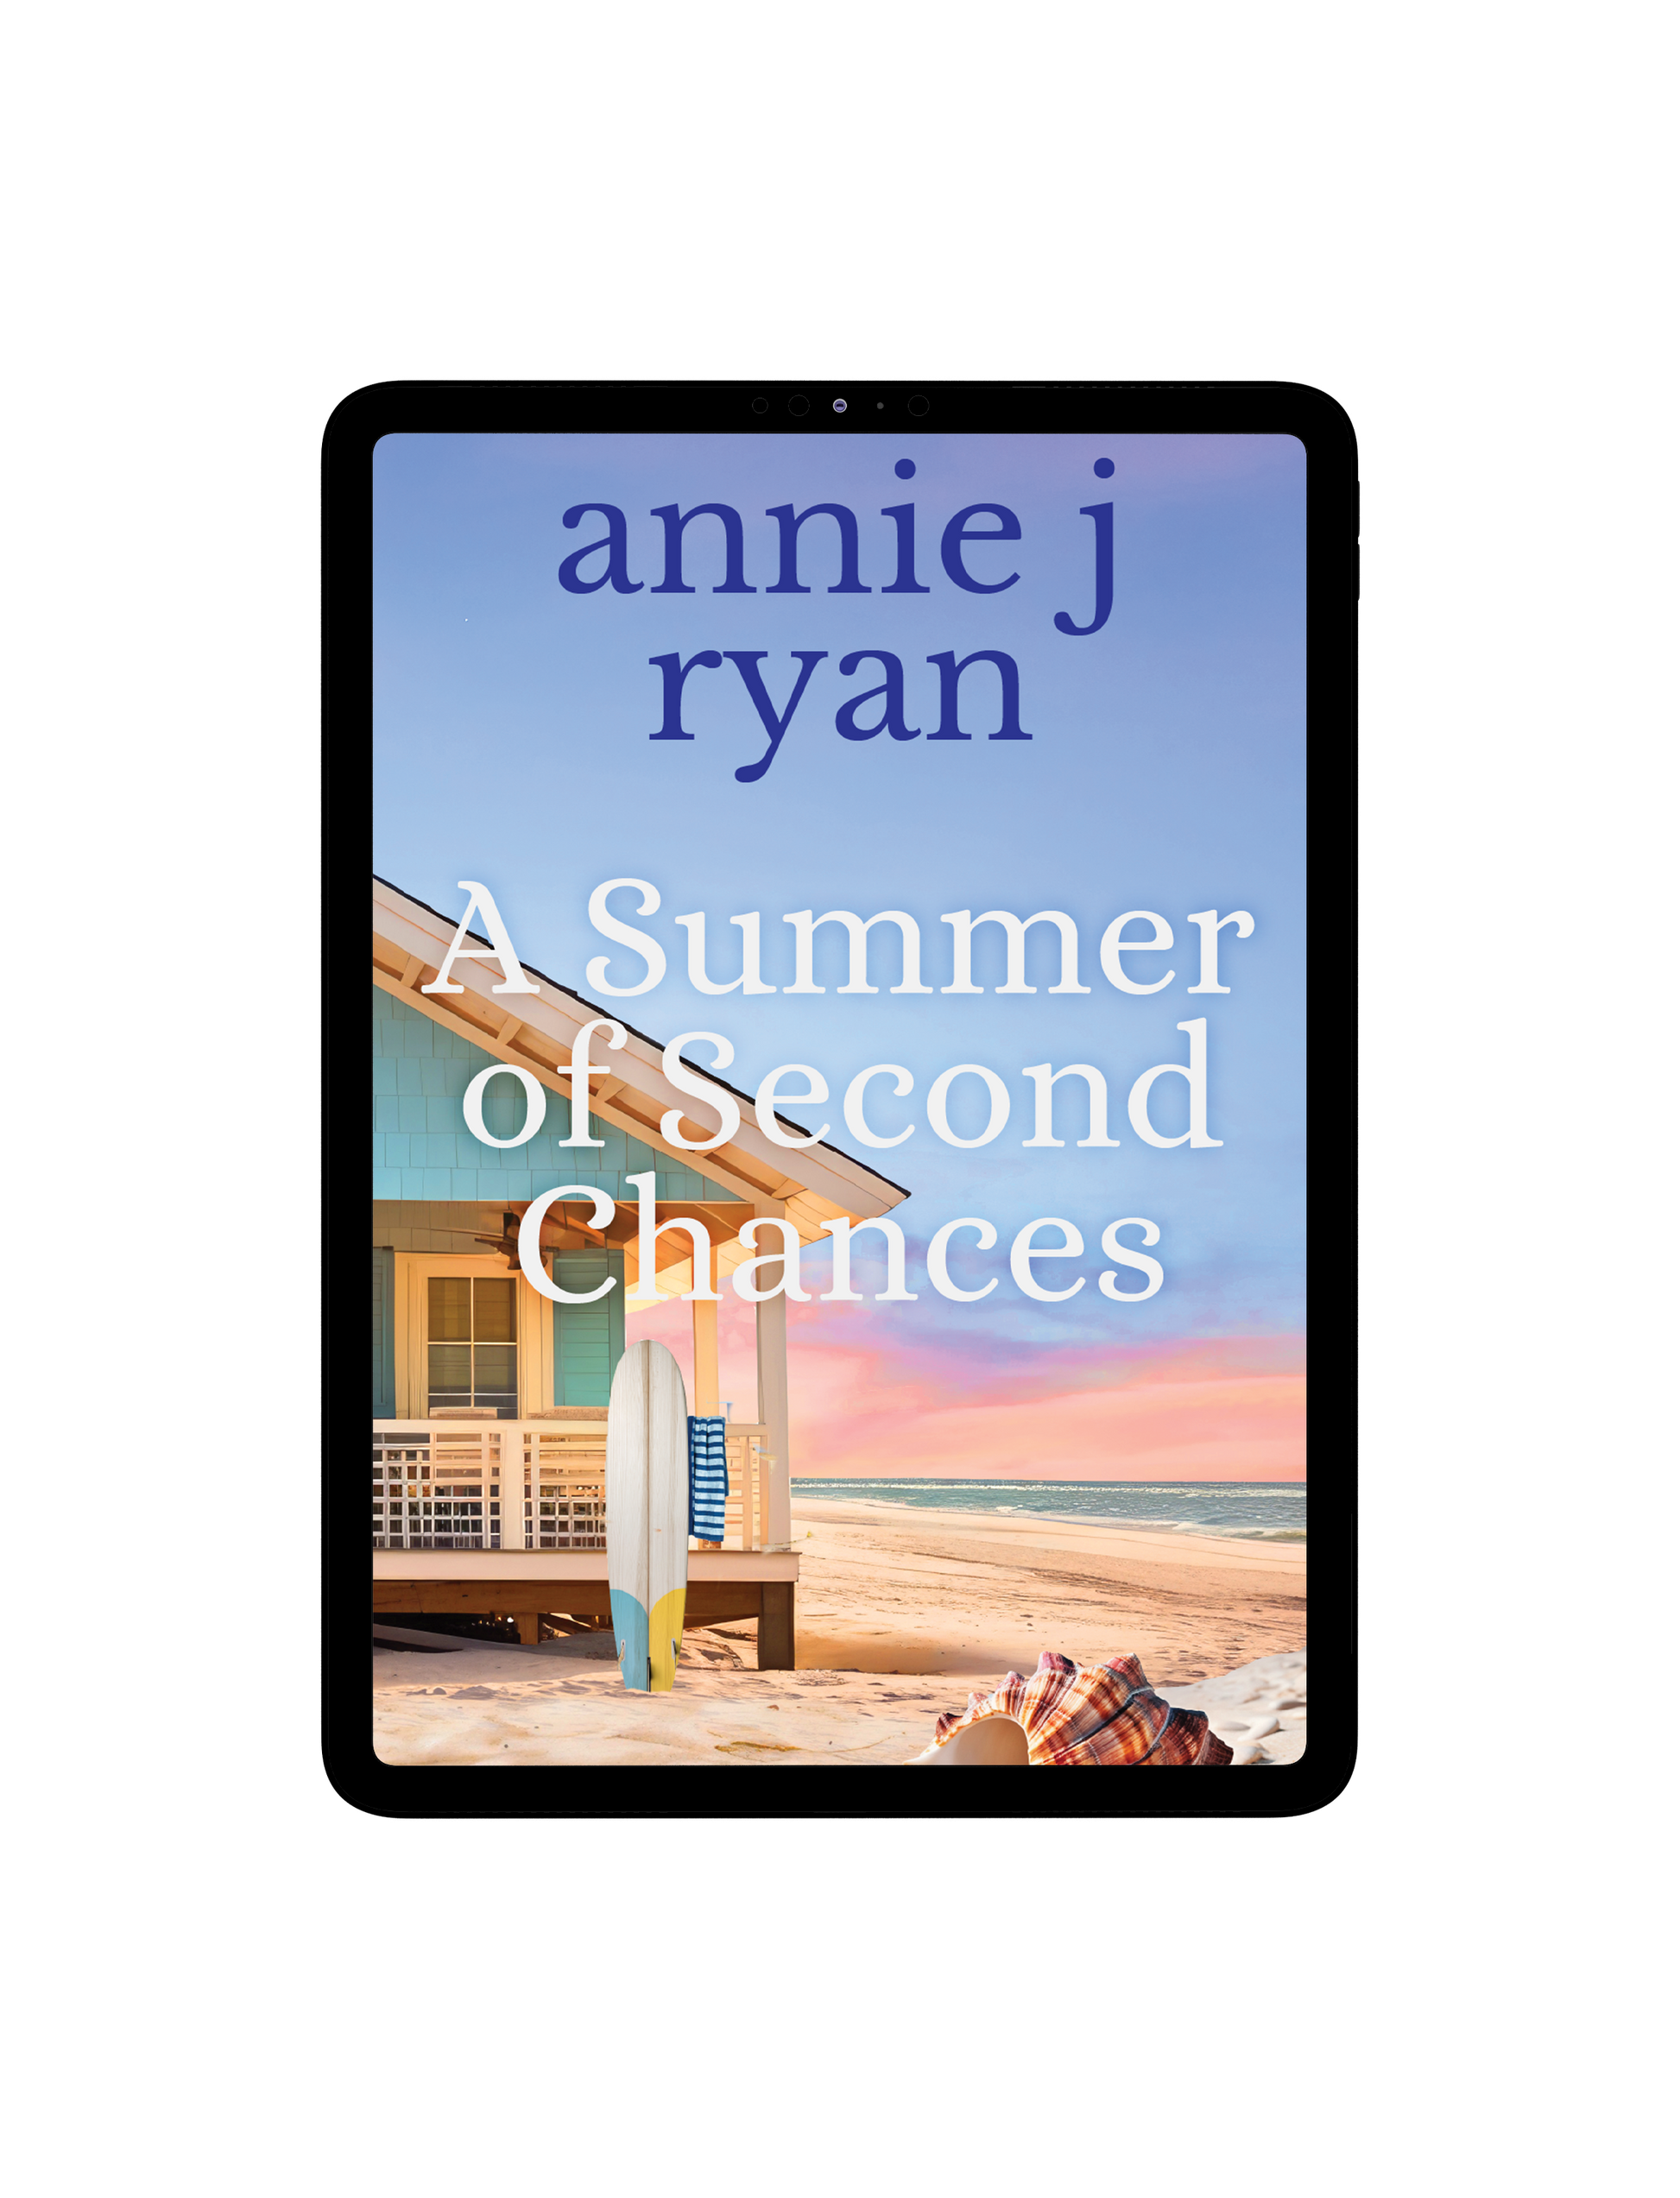 Annie J Ryan, A Summer of Second Chances, Author of women's fiction, romance, suspense, book club reads, beach reads, family life drama, 